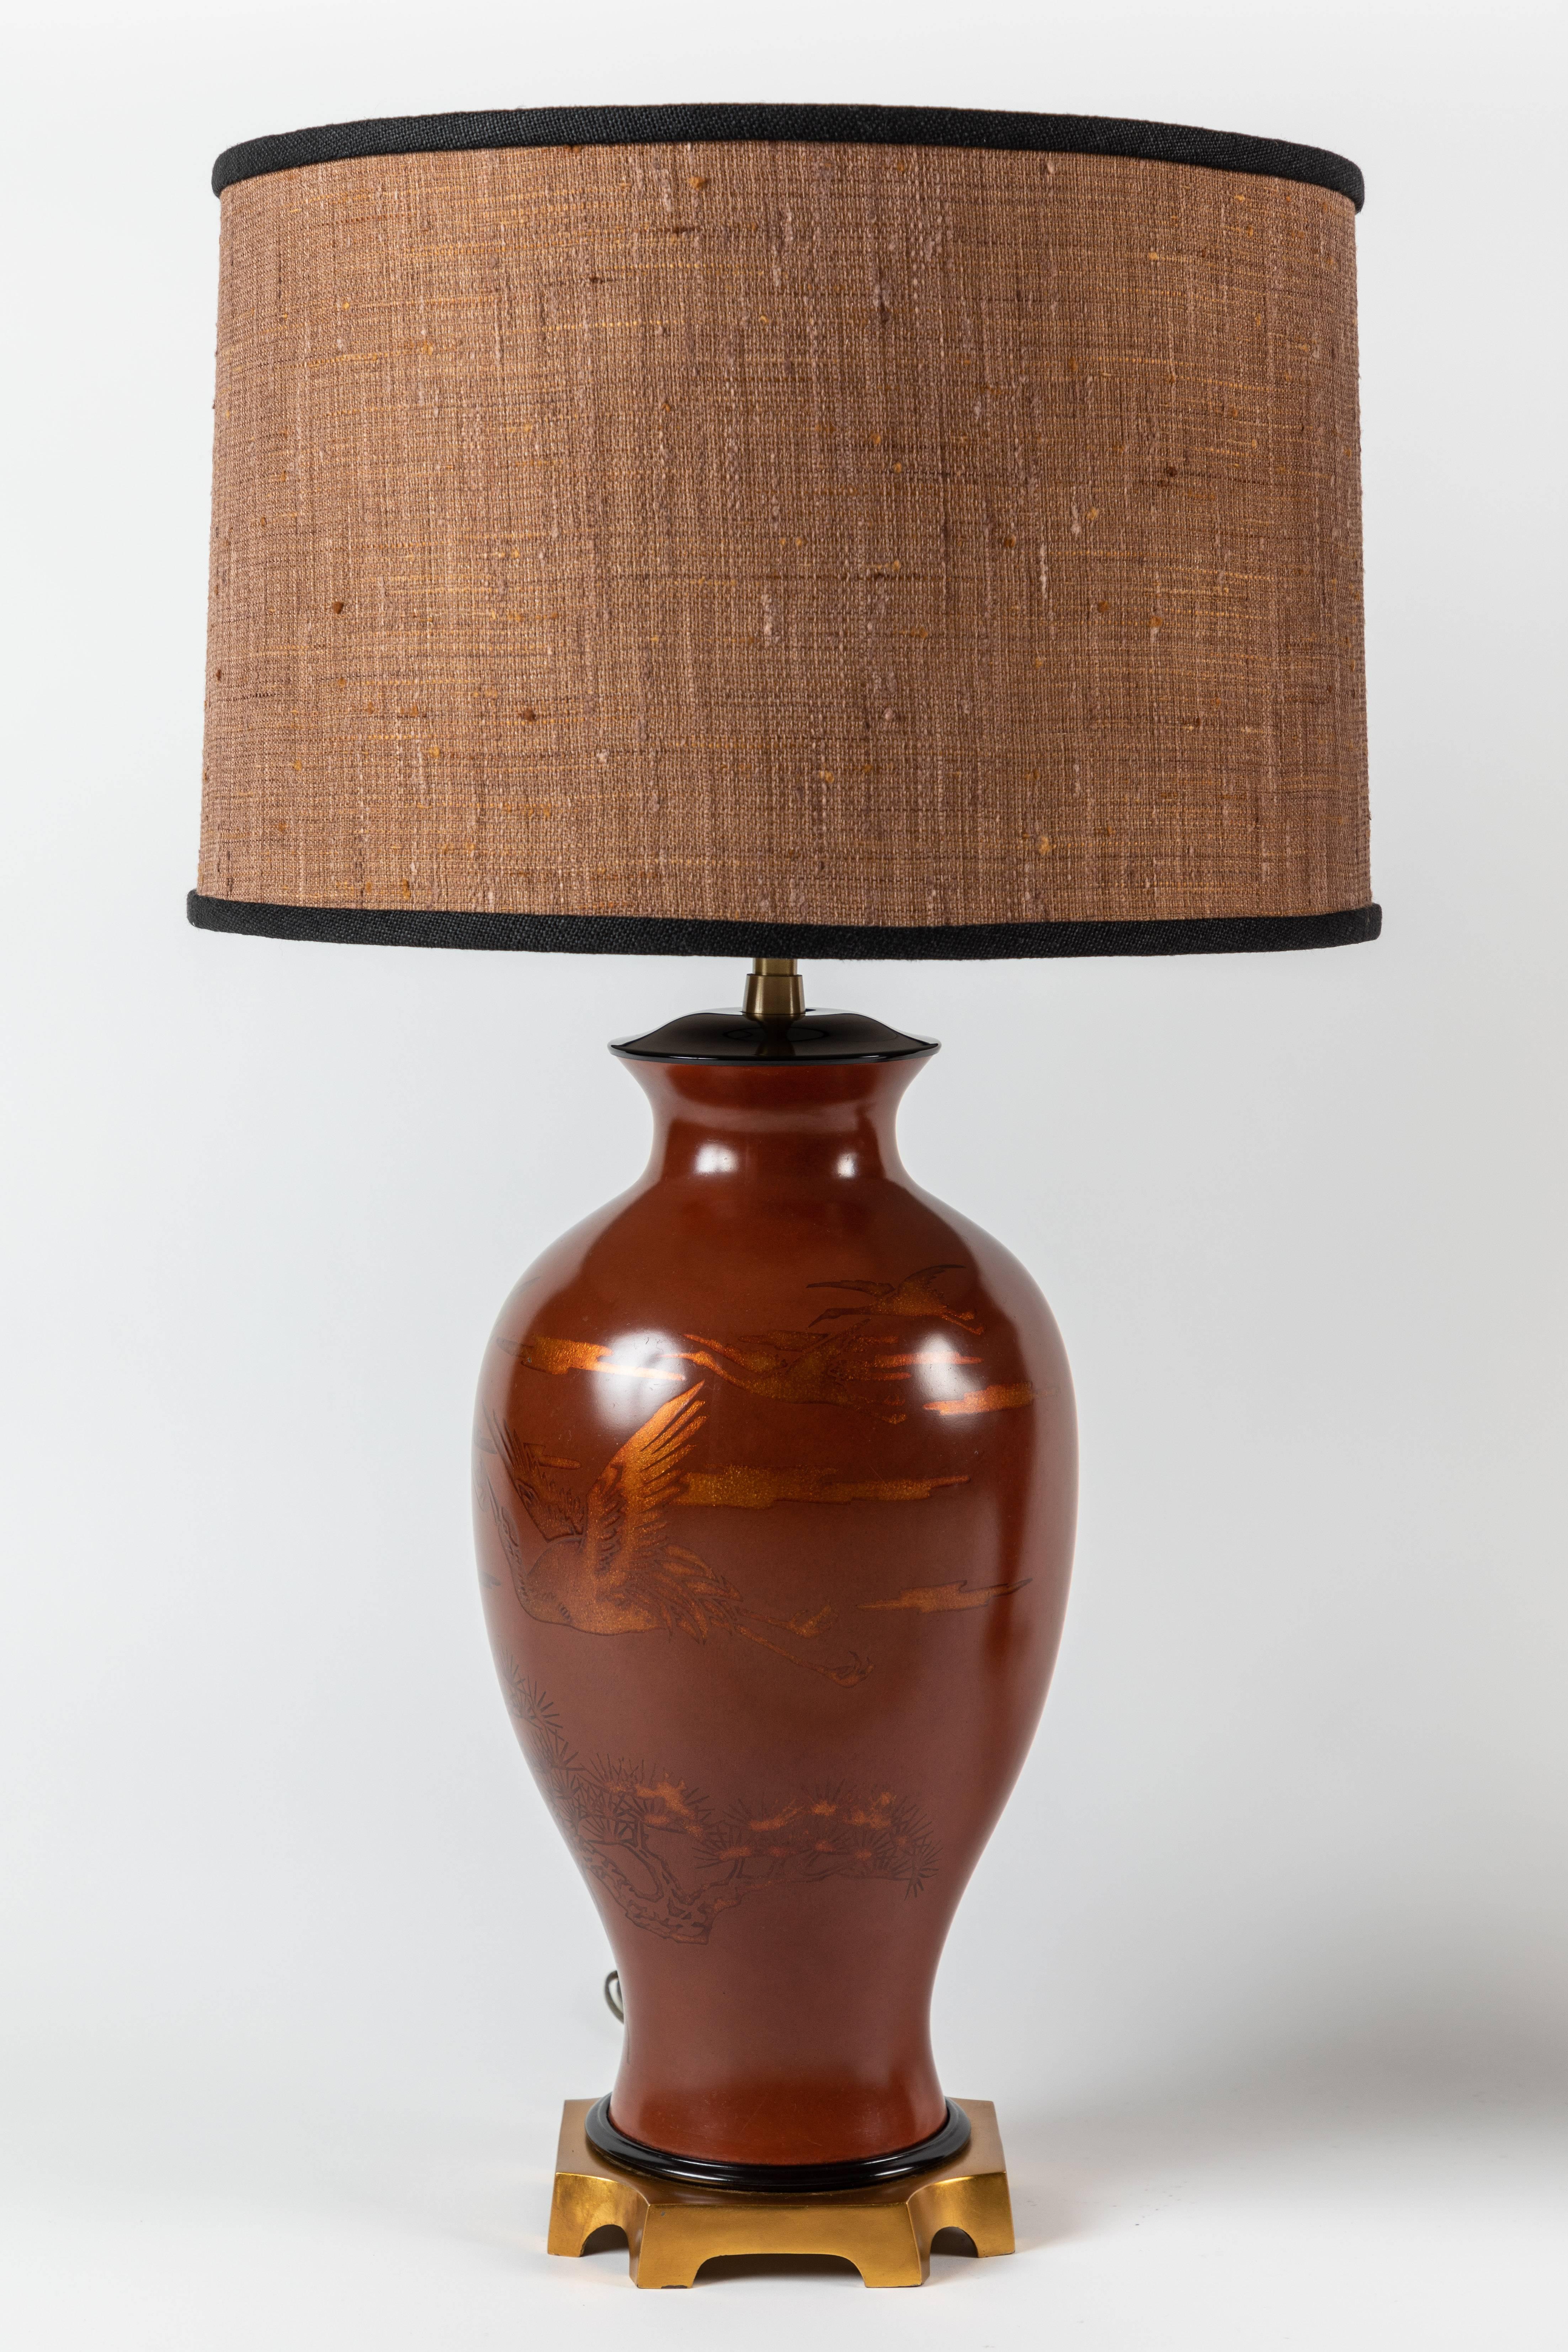 An exquisite pair of red ochre urn-shaped table lamps depicting flying storks / cranes and Japanese scenery. The urns are situated on a gilded rectangular platform. The urns are a sturdy paper mâché material.

Offered with newly-designed custom